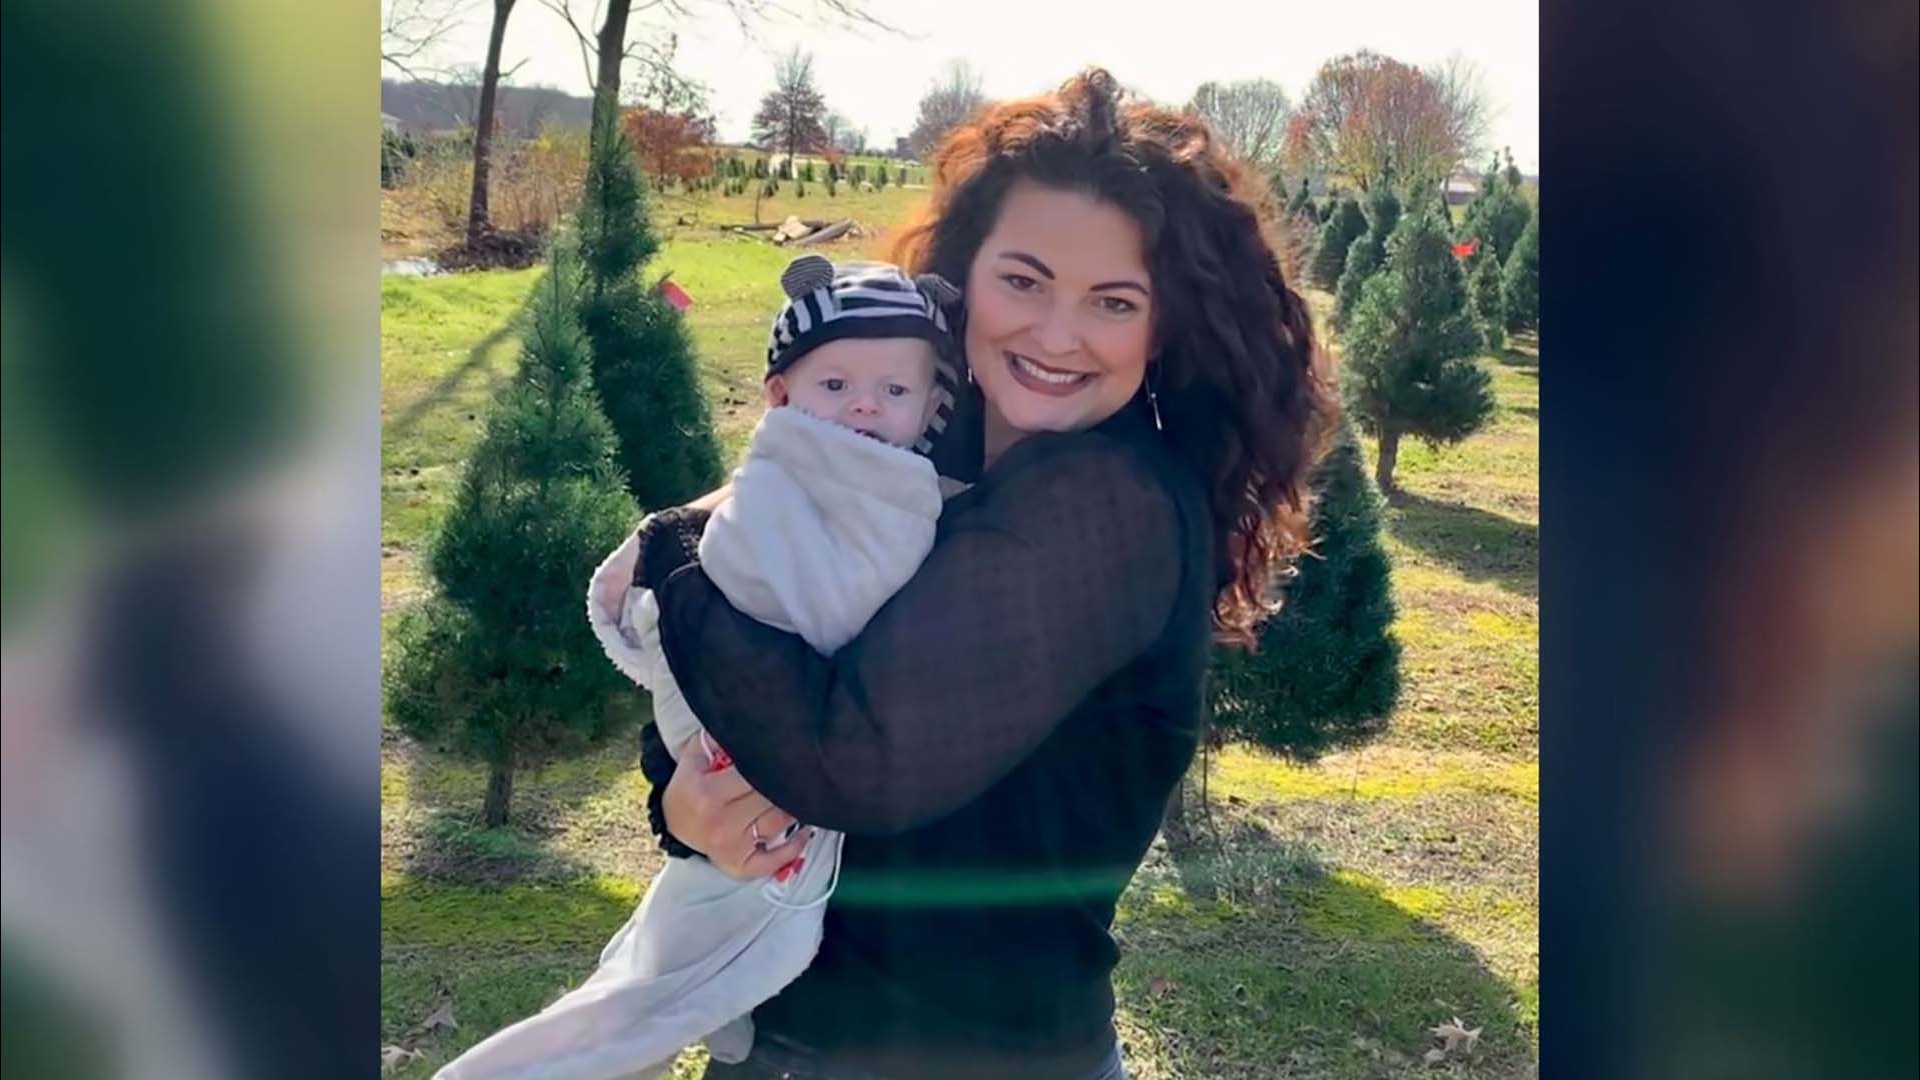 A Beaver Lake mom and her husband created a foundation to help families with infant loss, while also providing training and tools to prevent more in the future.